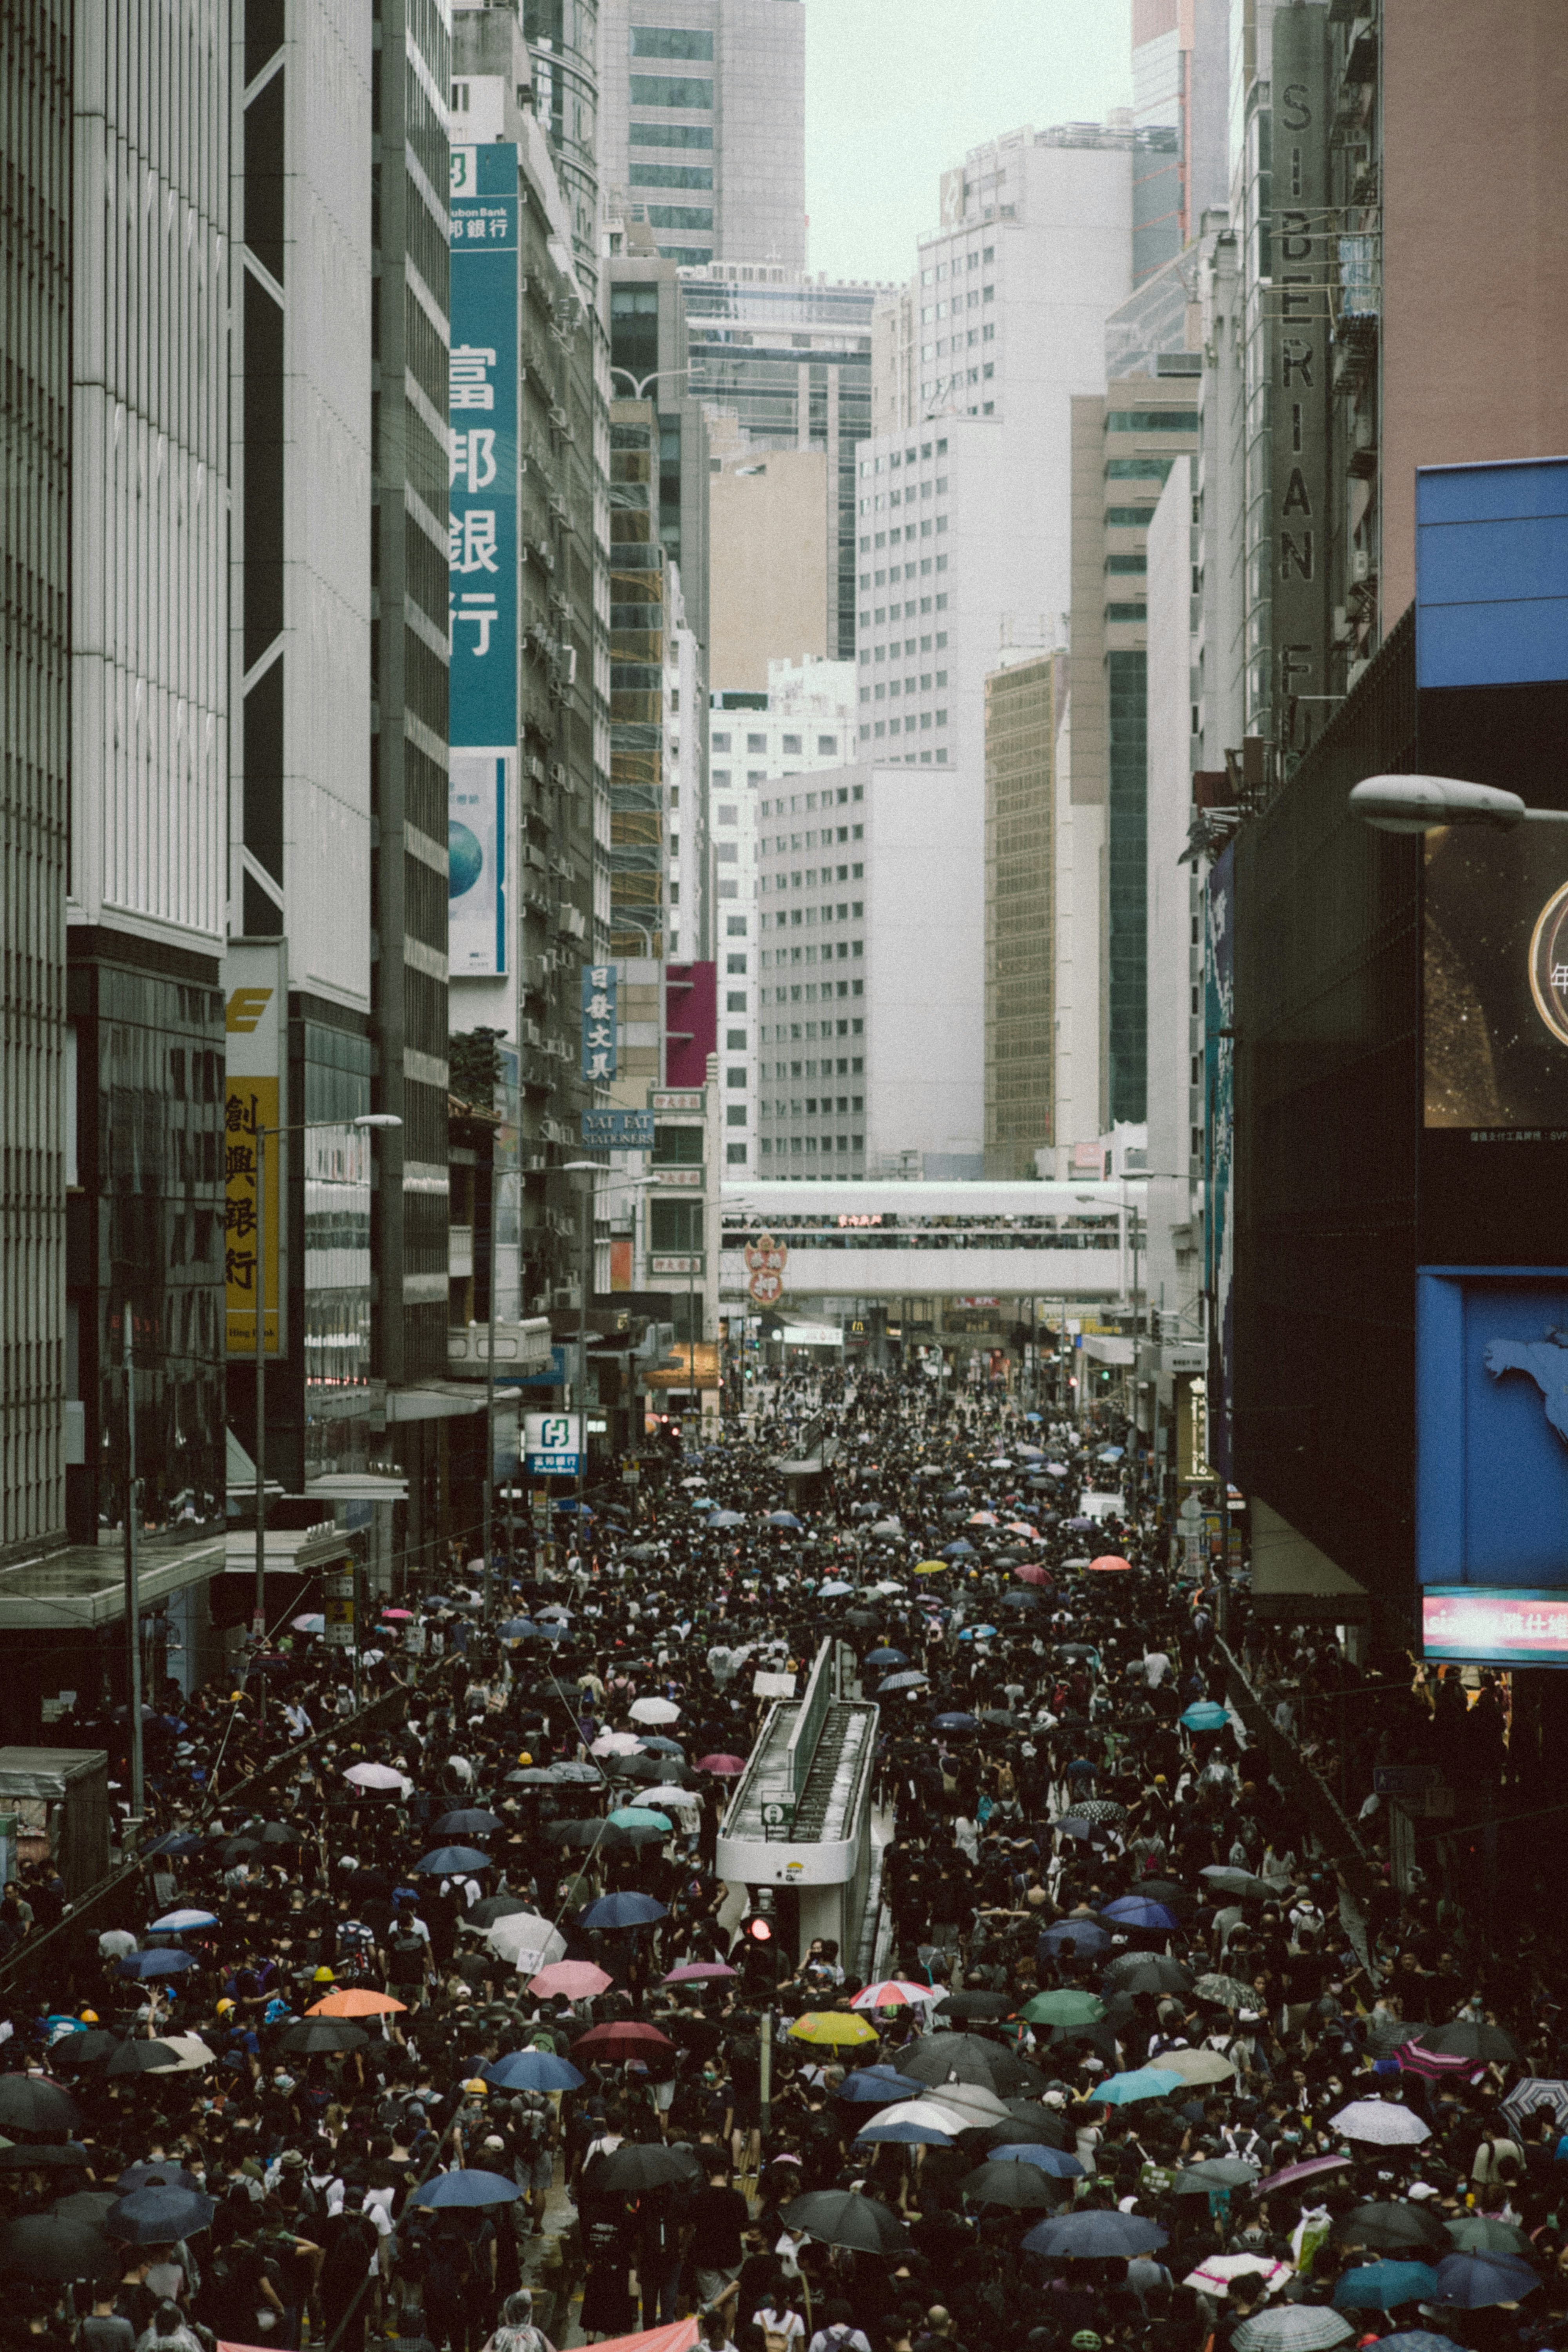 Tensions rise in Hong Kong after the government ban a protest and deny the protesters everything, forcing them to fight to the bitter end, convinced they have nothing to lose, 31/08/2019